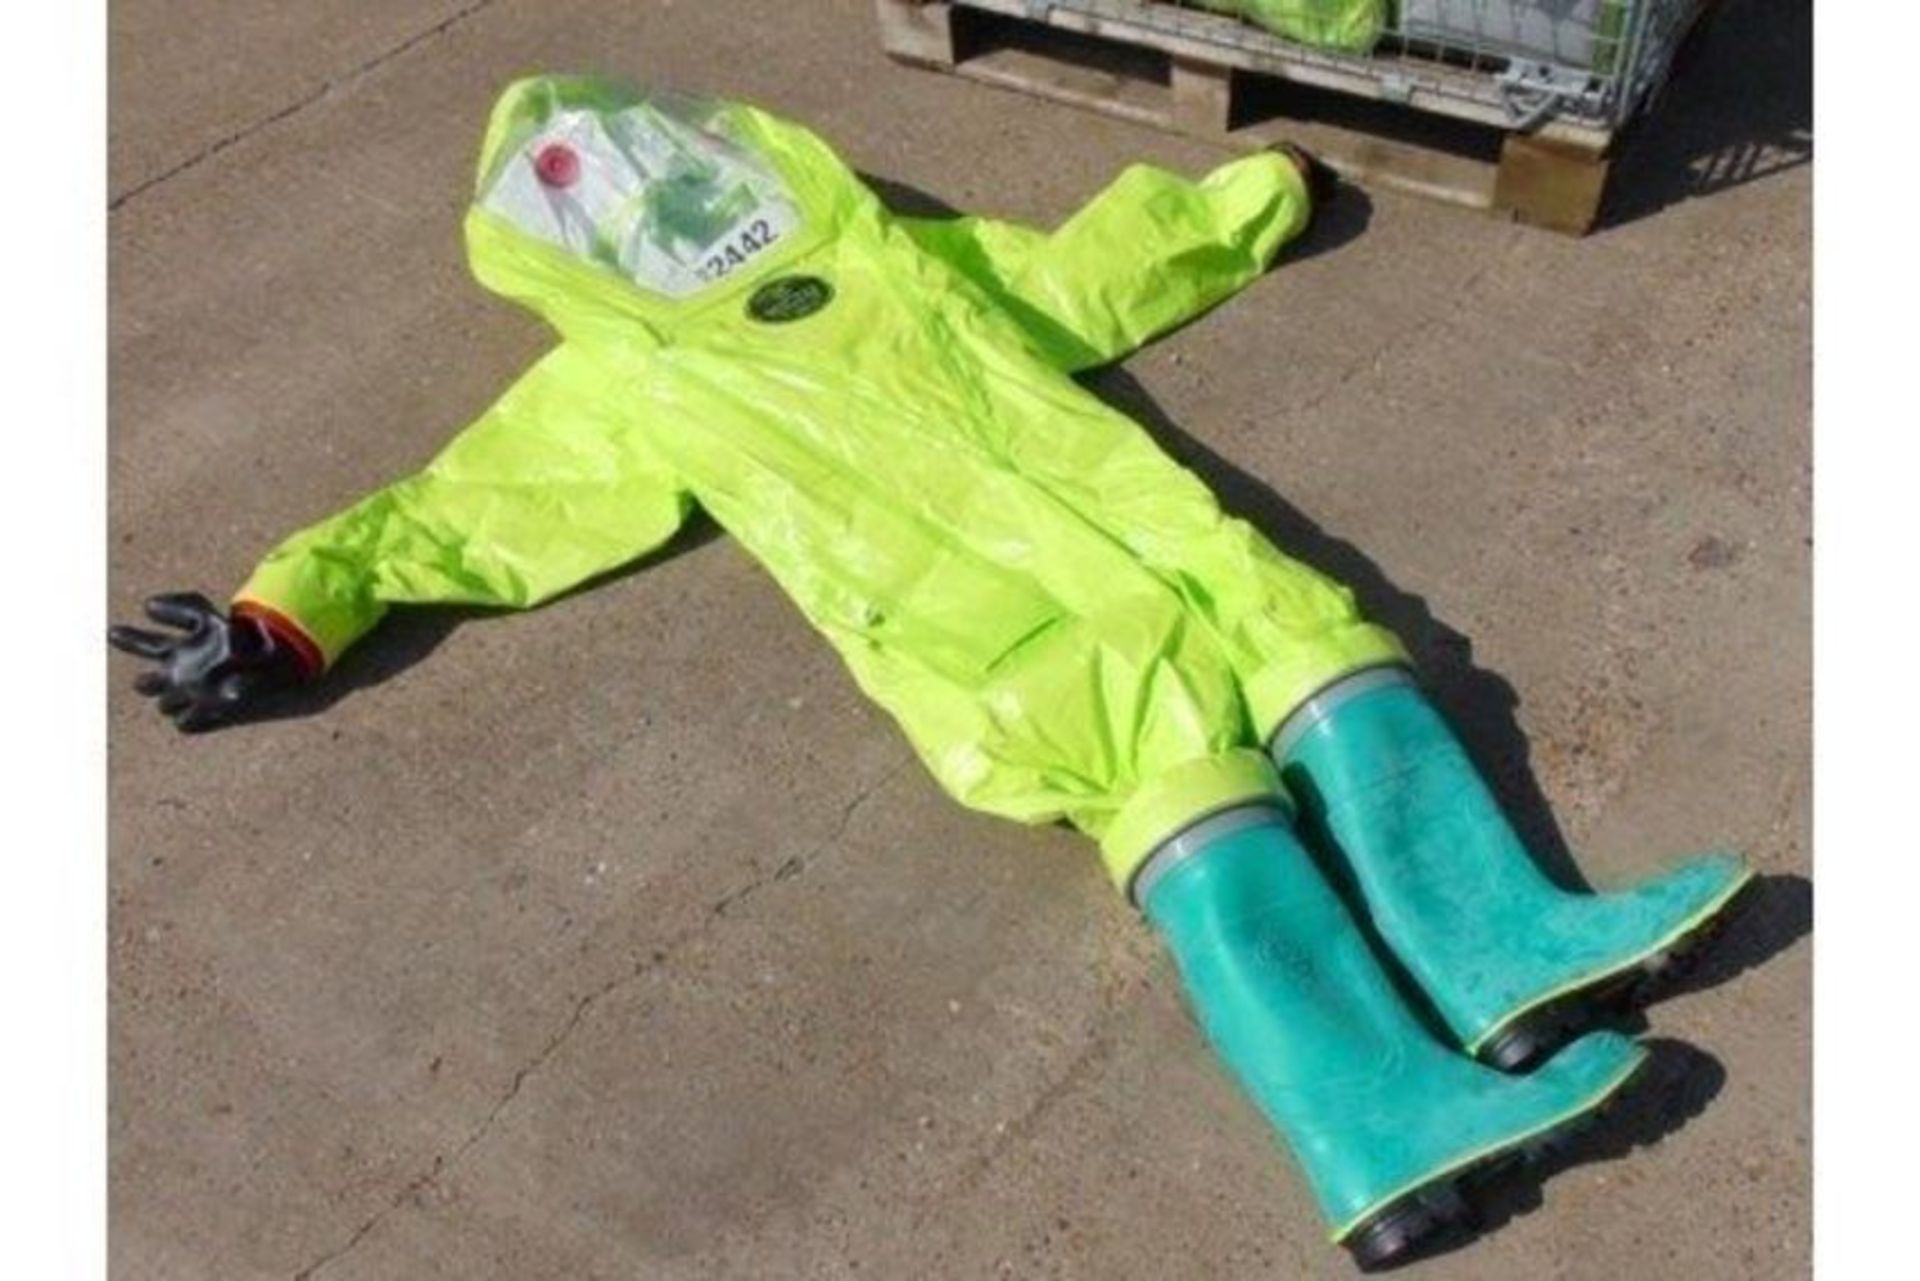 10 x Respirex Tychem TK Gas-Tight Hazmat Suit Type 1A with Attached Boots and Gloves - Image 6 of 10